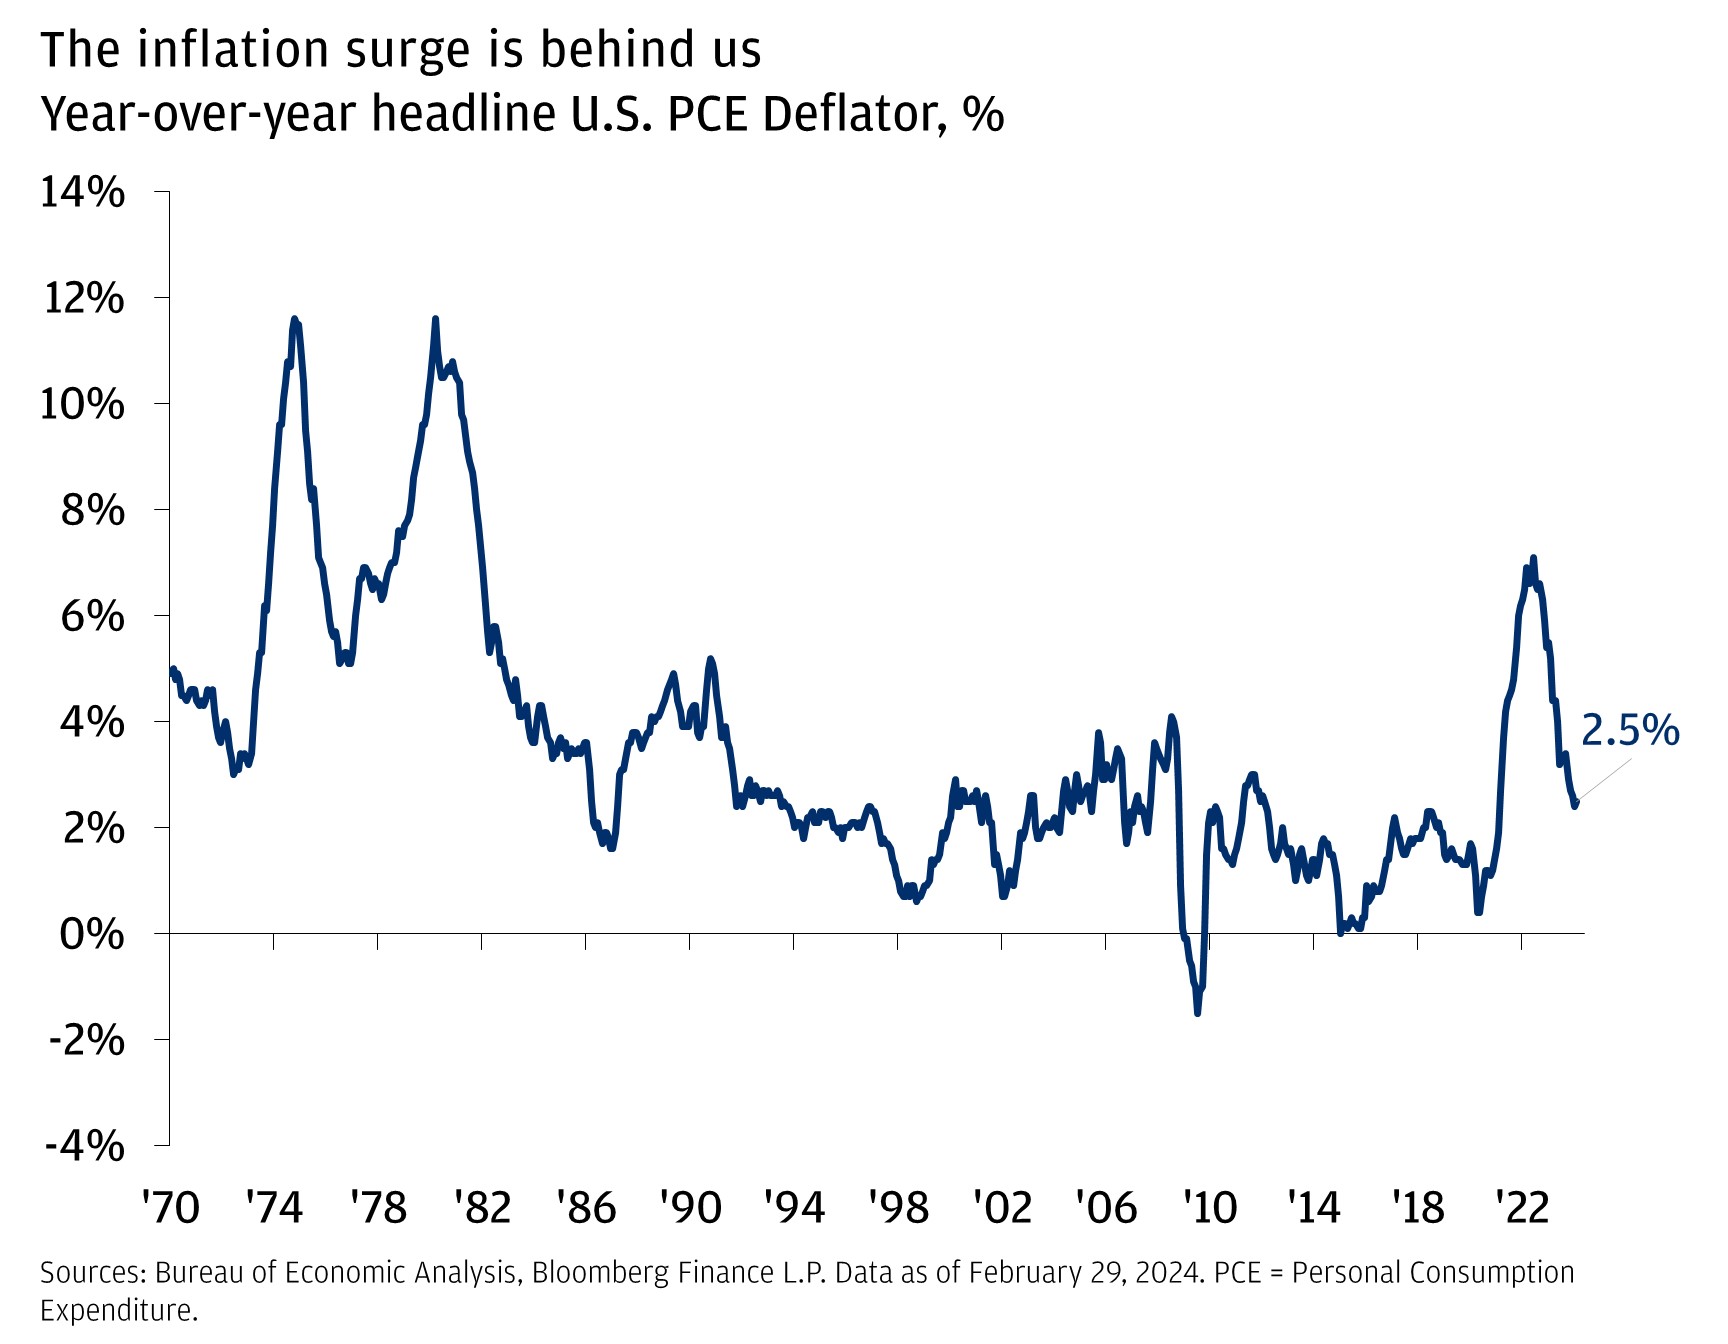 This chart shows the year-over-year headline U.S. PCE Deflator in percentages, from 1970 to 2024. The series begins at 5% in February 1970 and falls to 3% in June 1972, before rising to 11.6% in October 1974. It falls again to 5.1% in December 1976 and subsequently increases to 11.6% in March 1980.